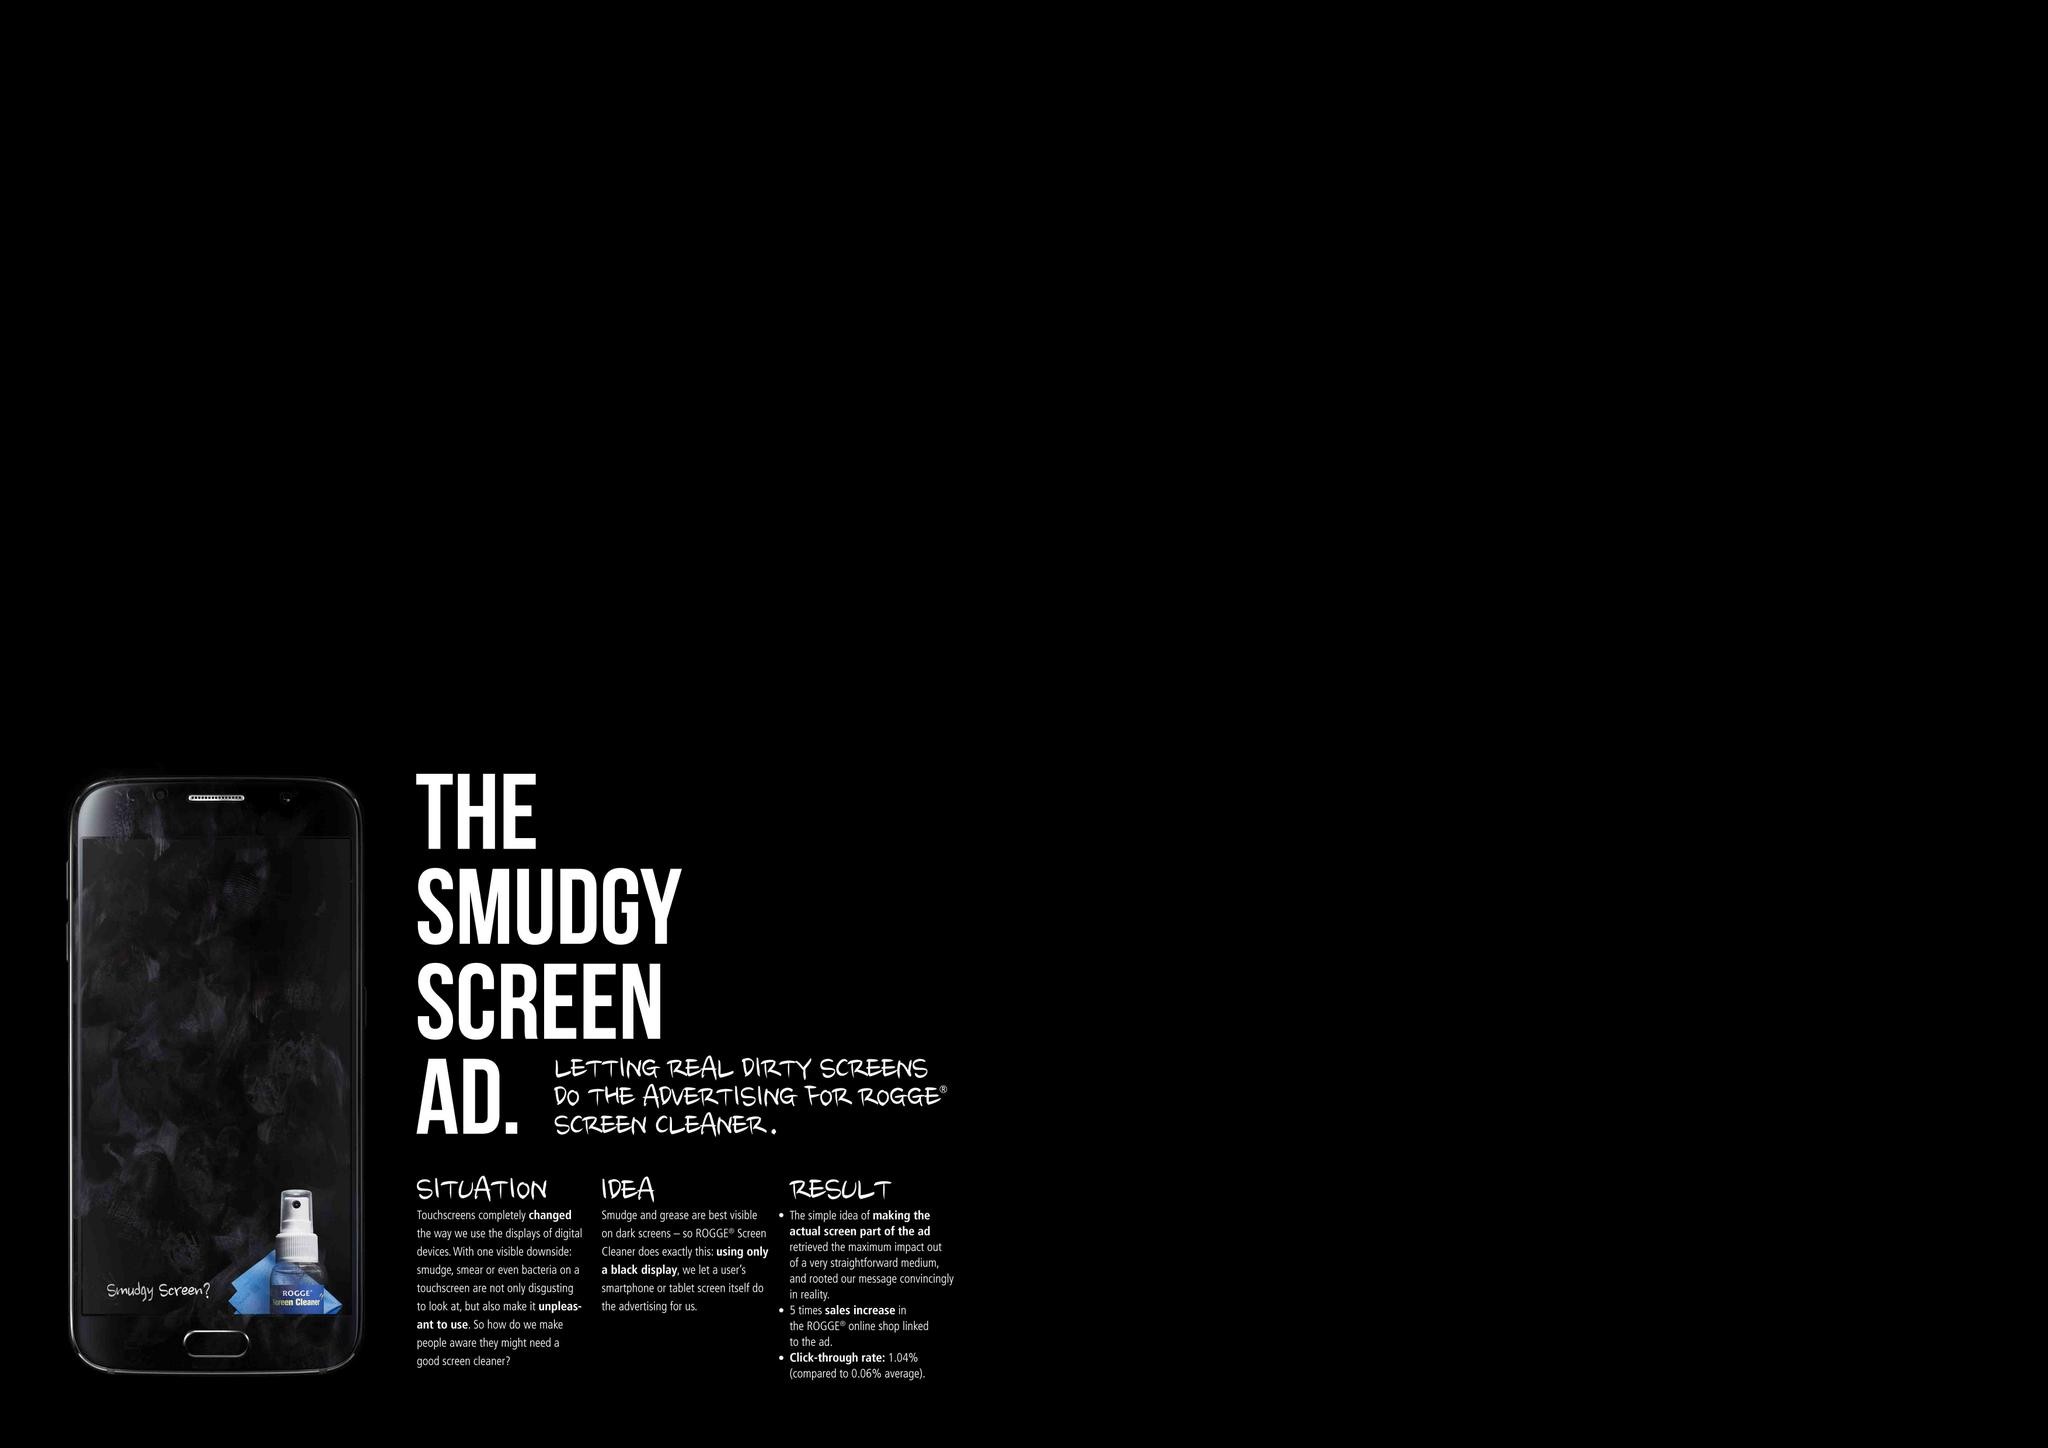 THE SMUDGY SCREEN DISPLAY AD